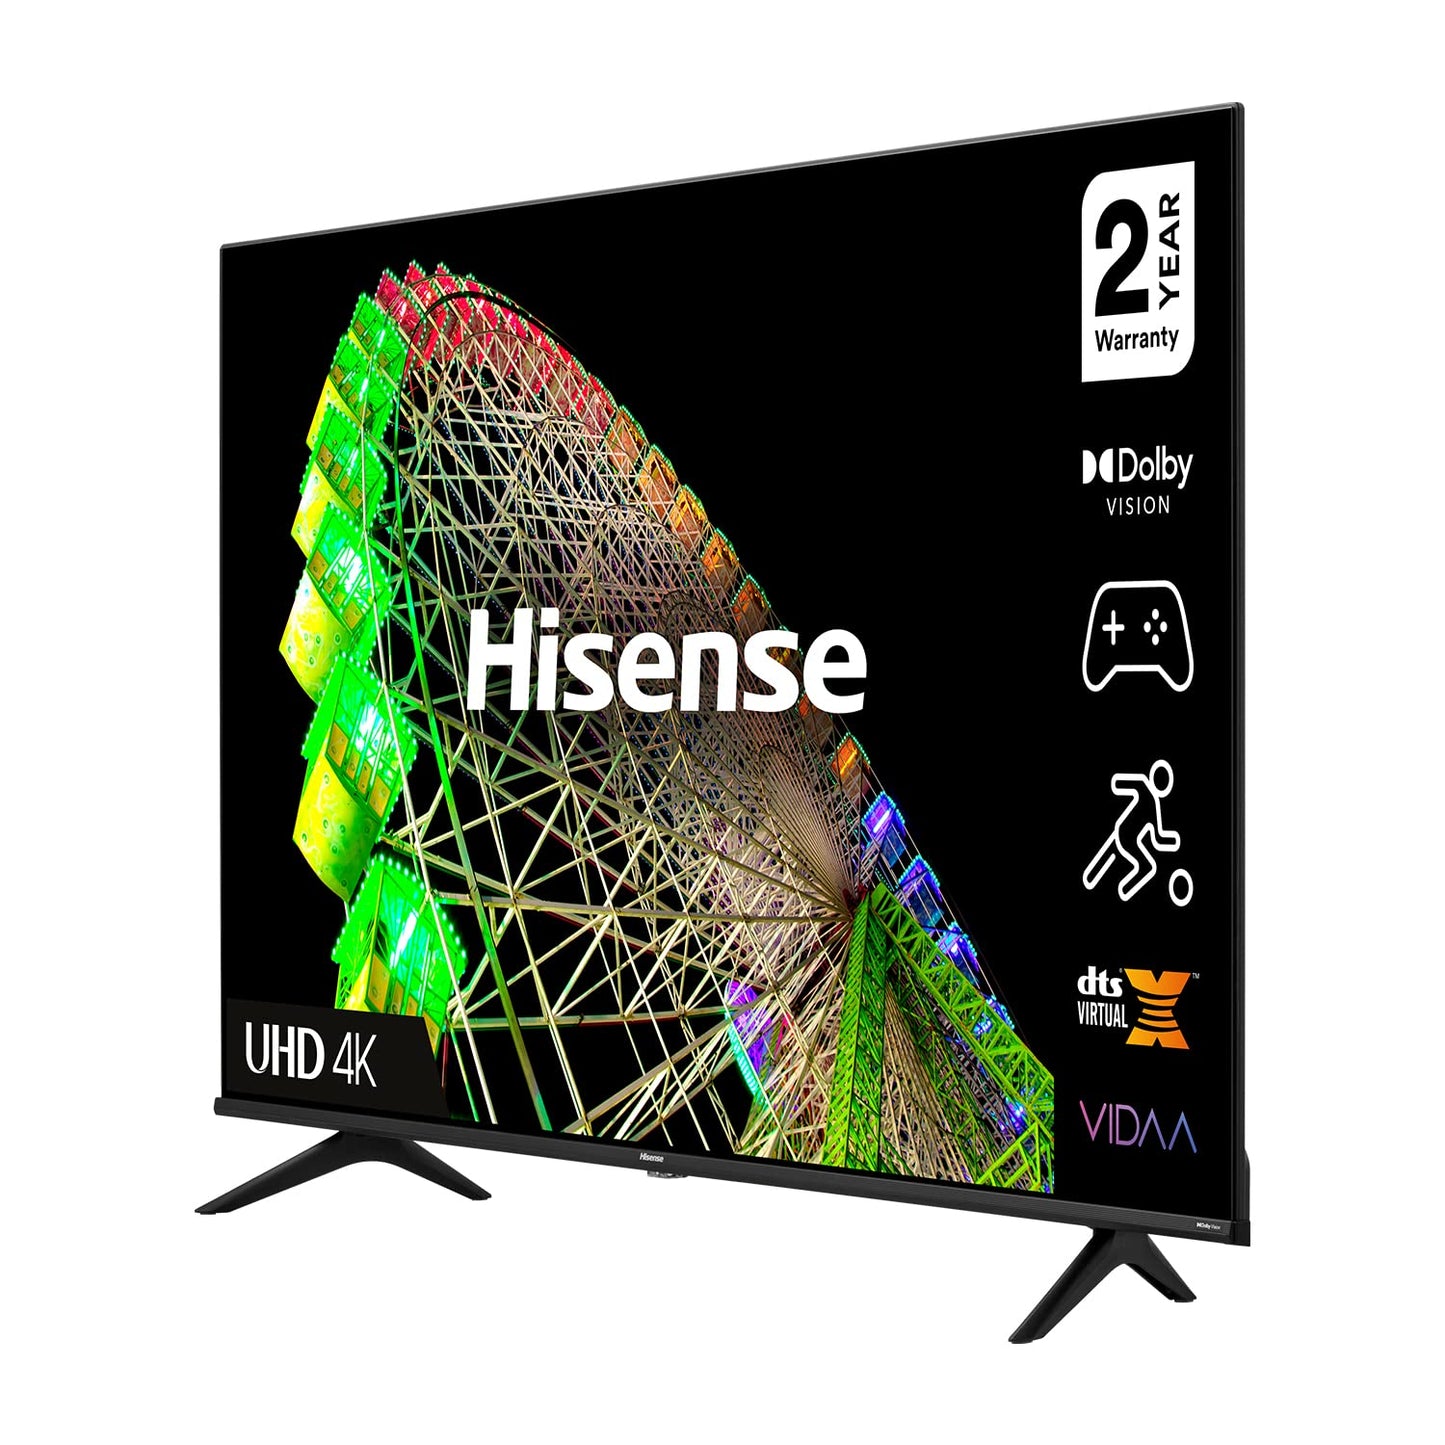 HISENSE 65A6BGTUK (65 Inch) 4K UHD Smart TV, with Dolby Vision HDR, DTS Virtual X, Youtube, Netflix, Disney +, Freeview Play and Alexa Built-in, Bluetooth and WiFi (2022 NEW)